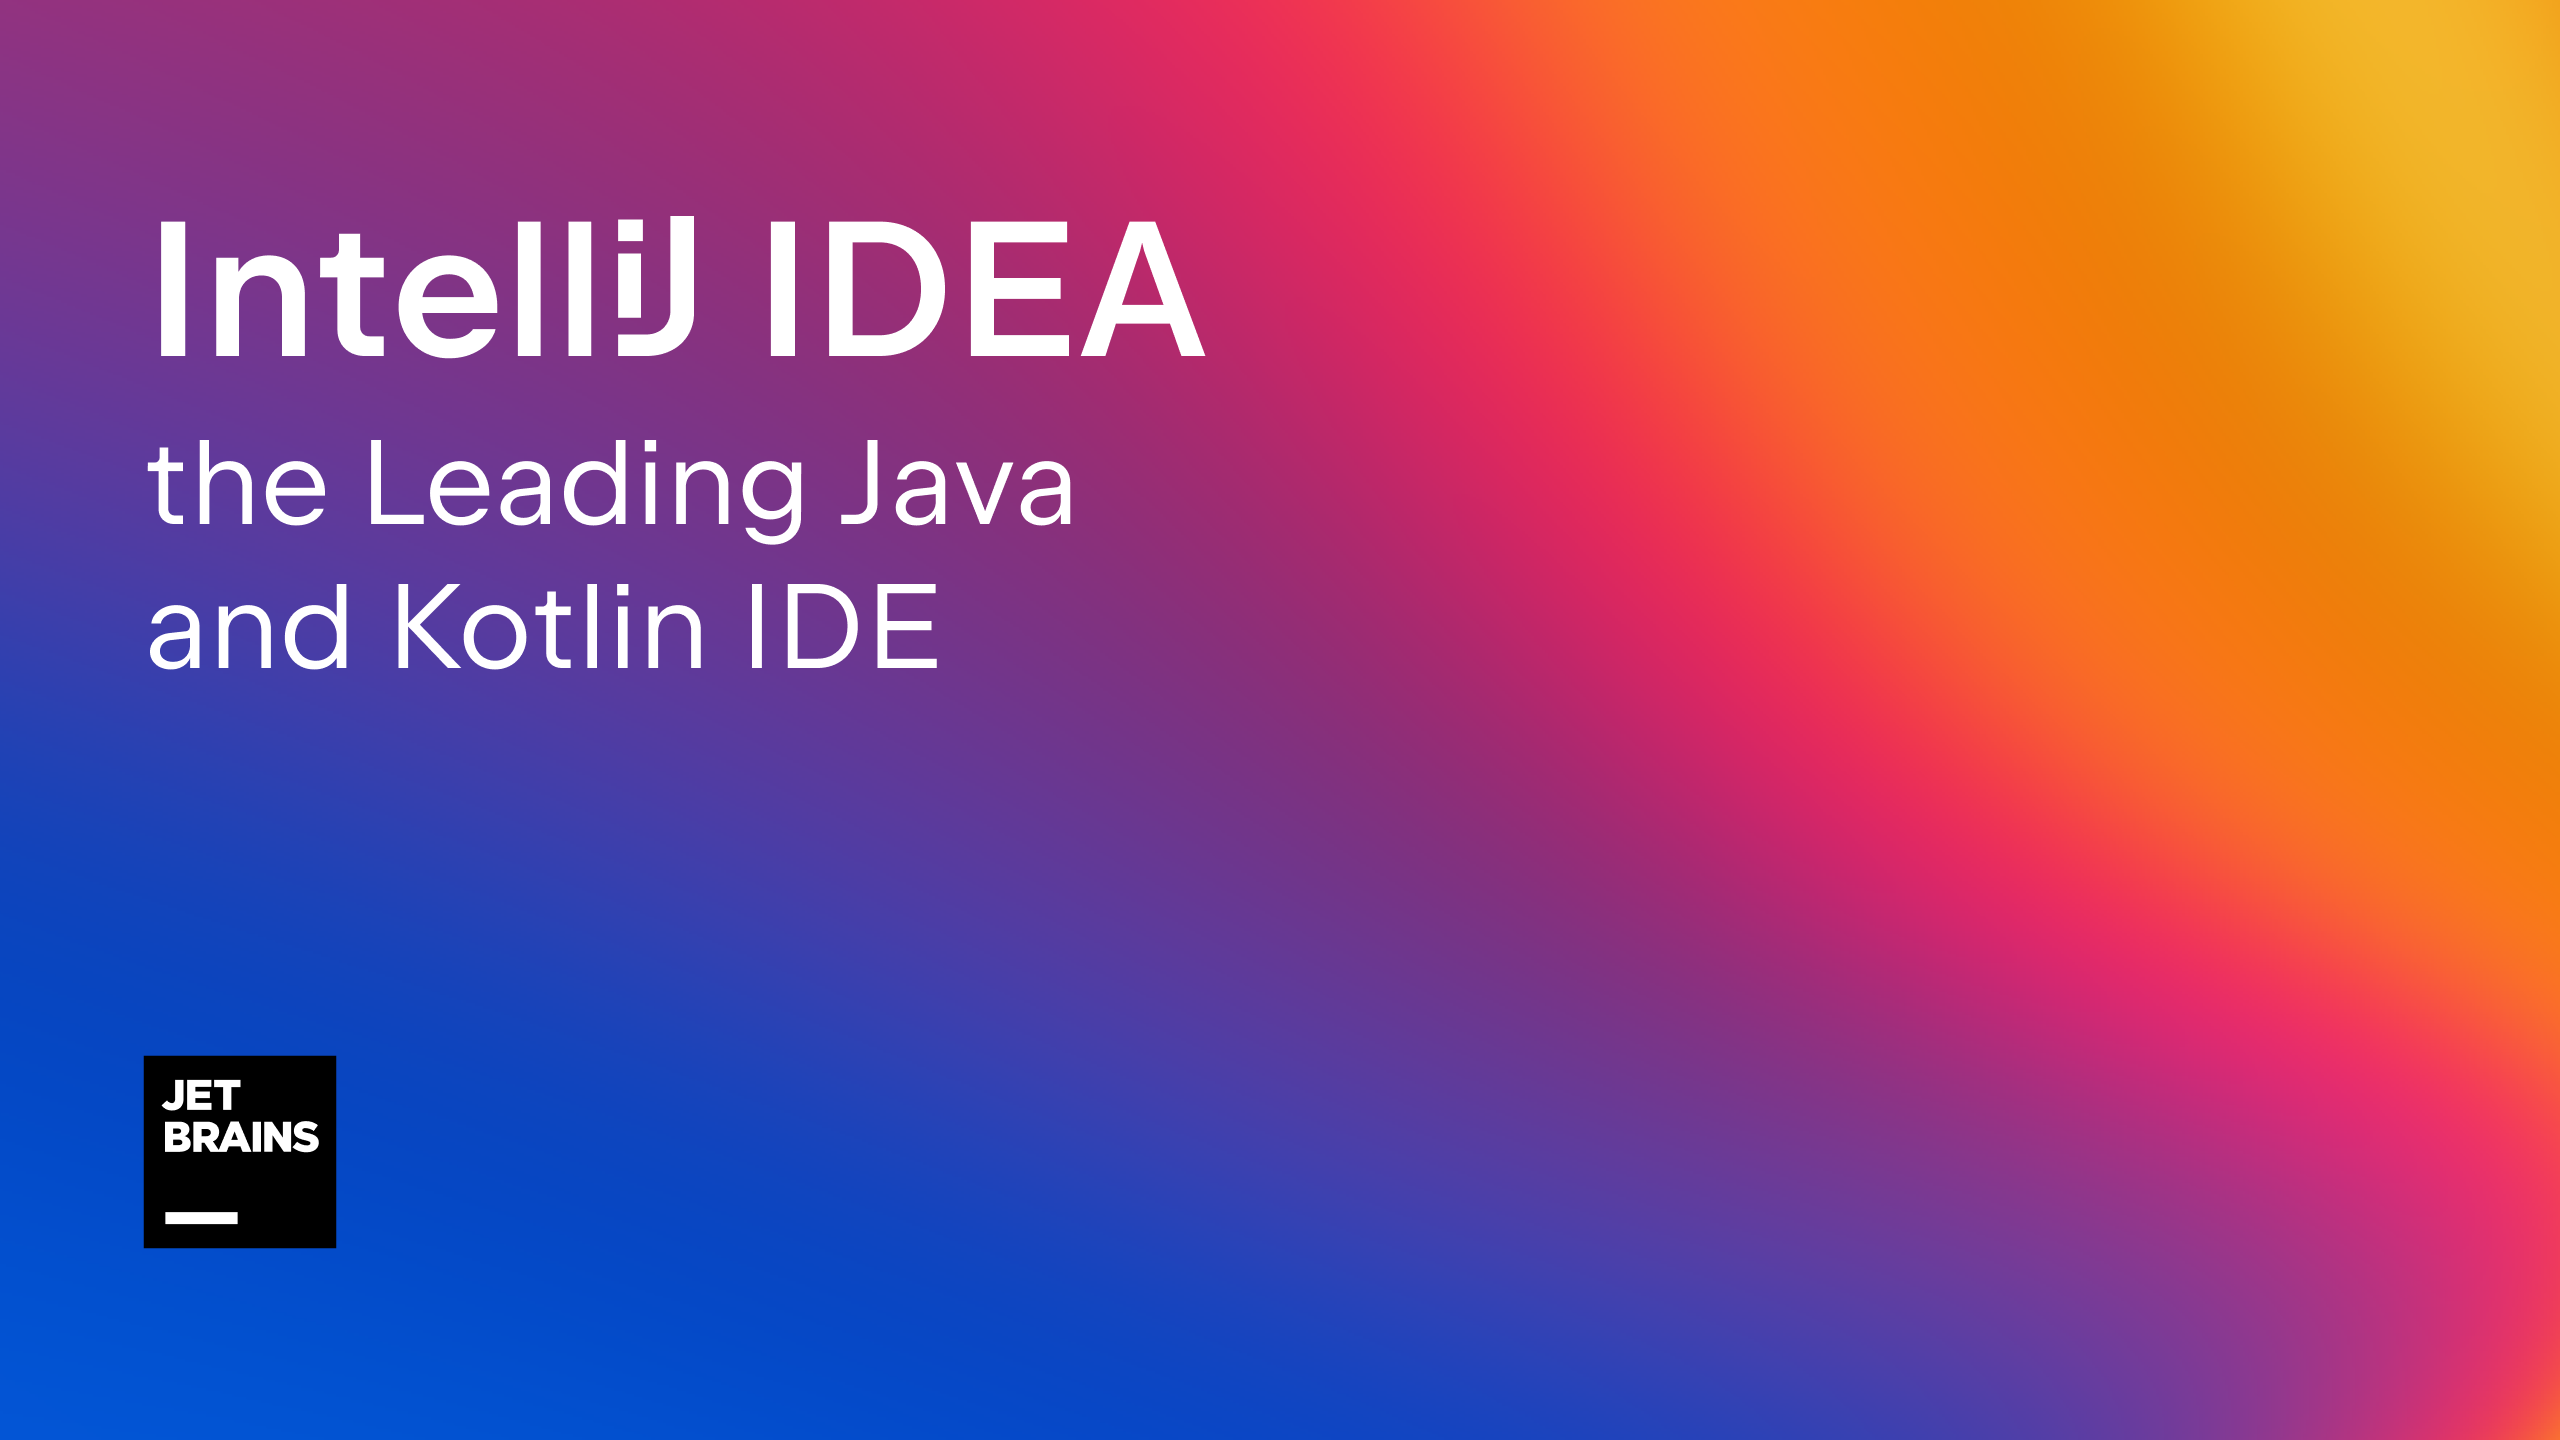 Last year, we announced our intention to overhaul the UI of IntelliJ-based IDEs to provide developers with a more modern, customizable, and user-frien